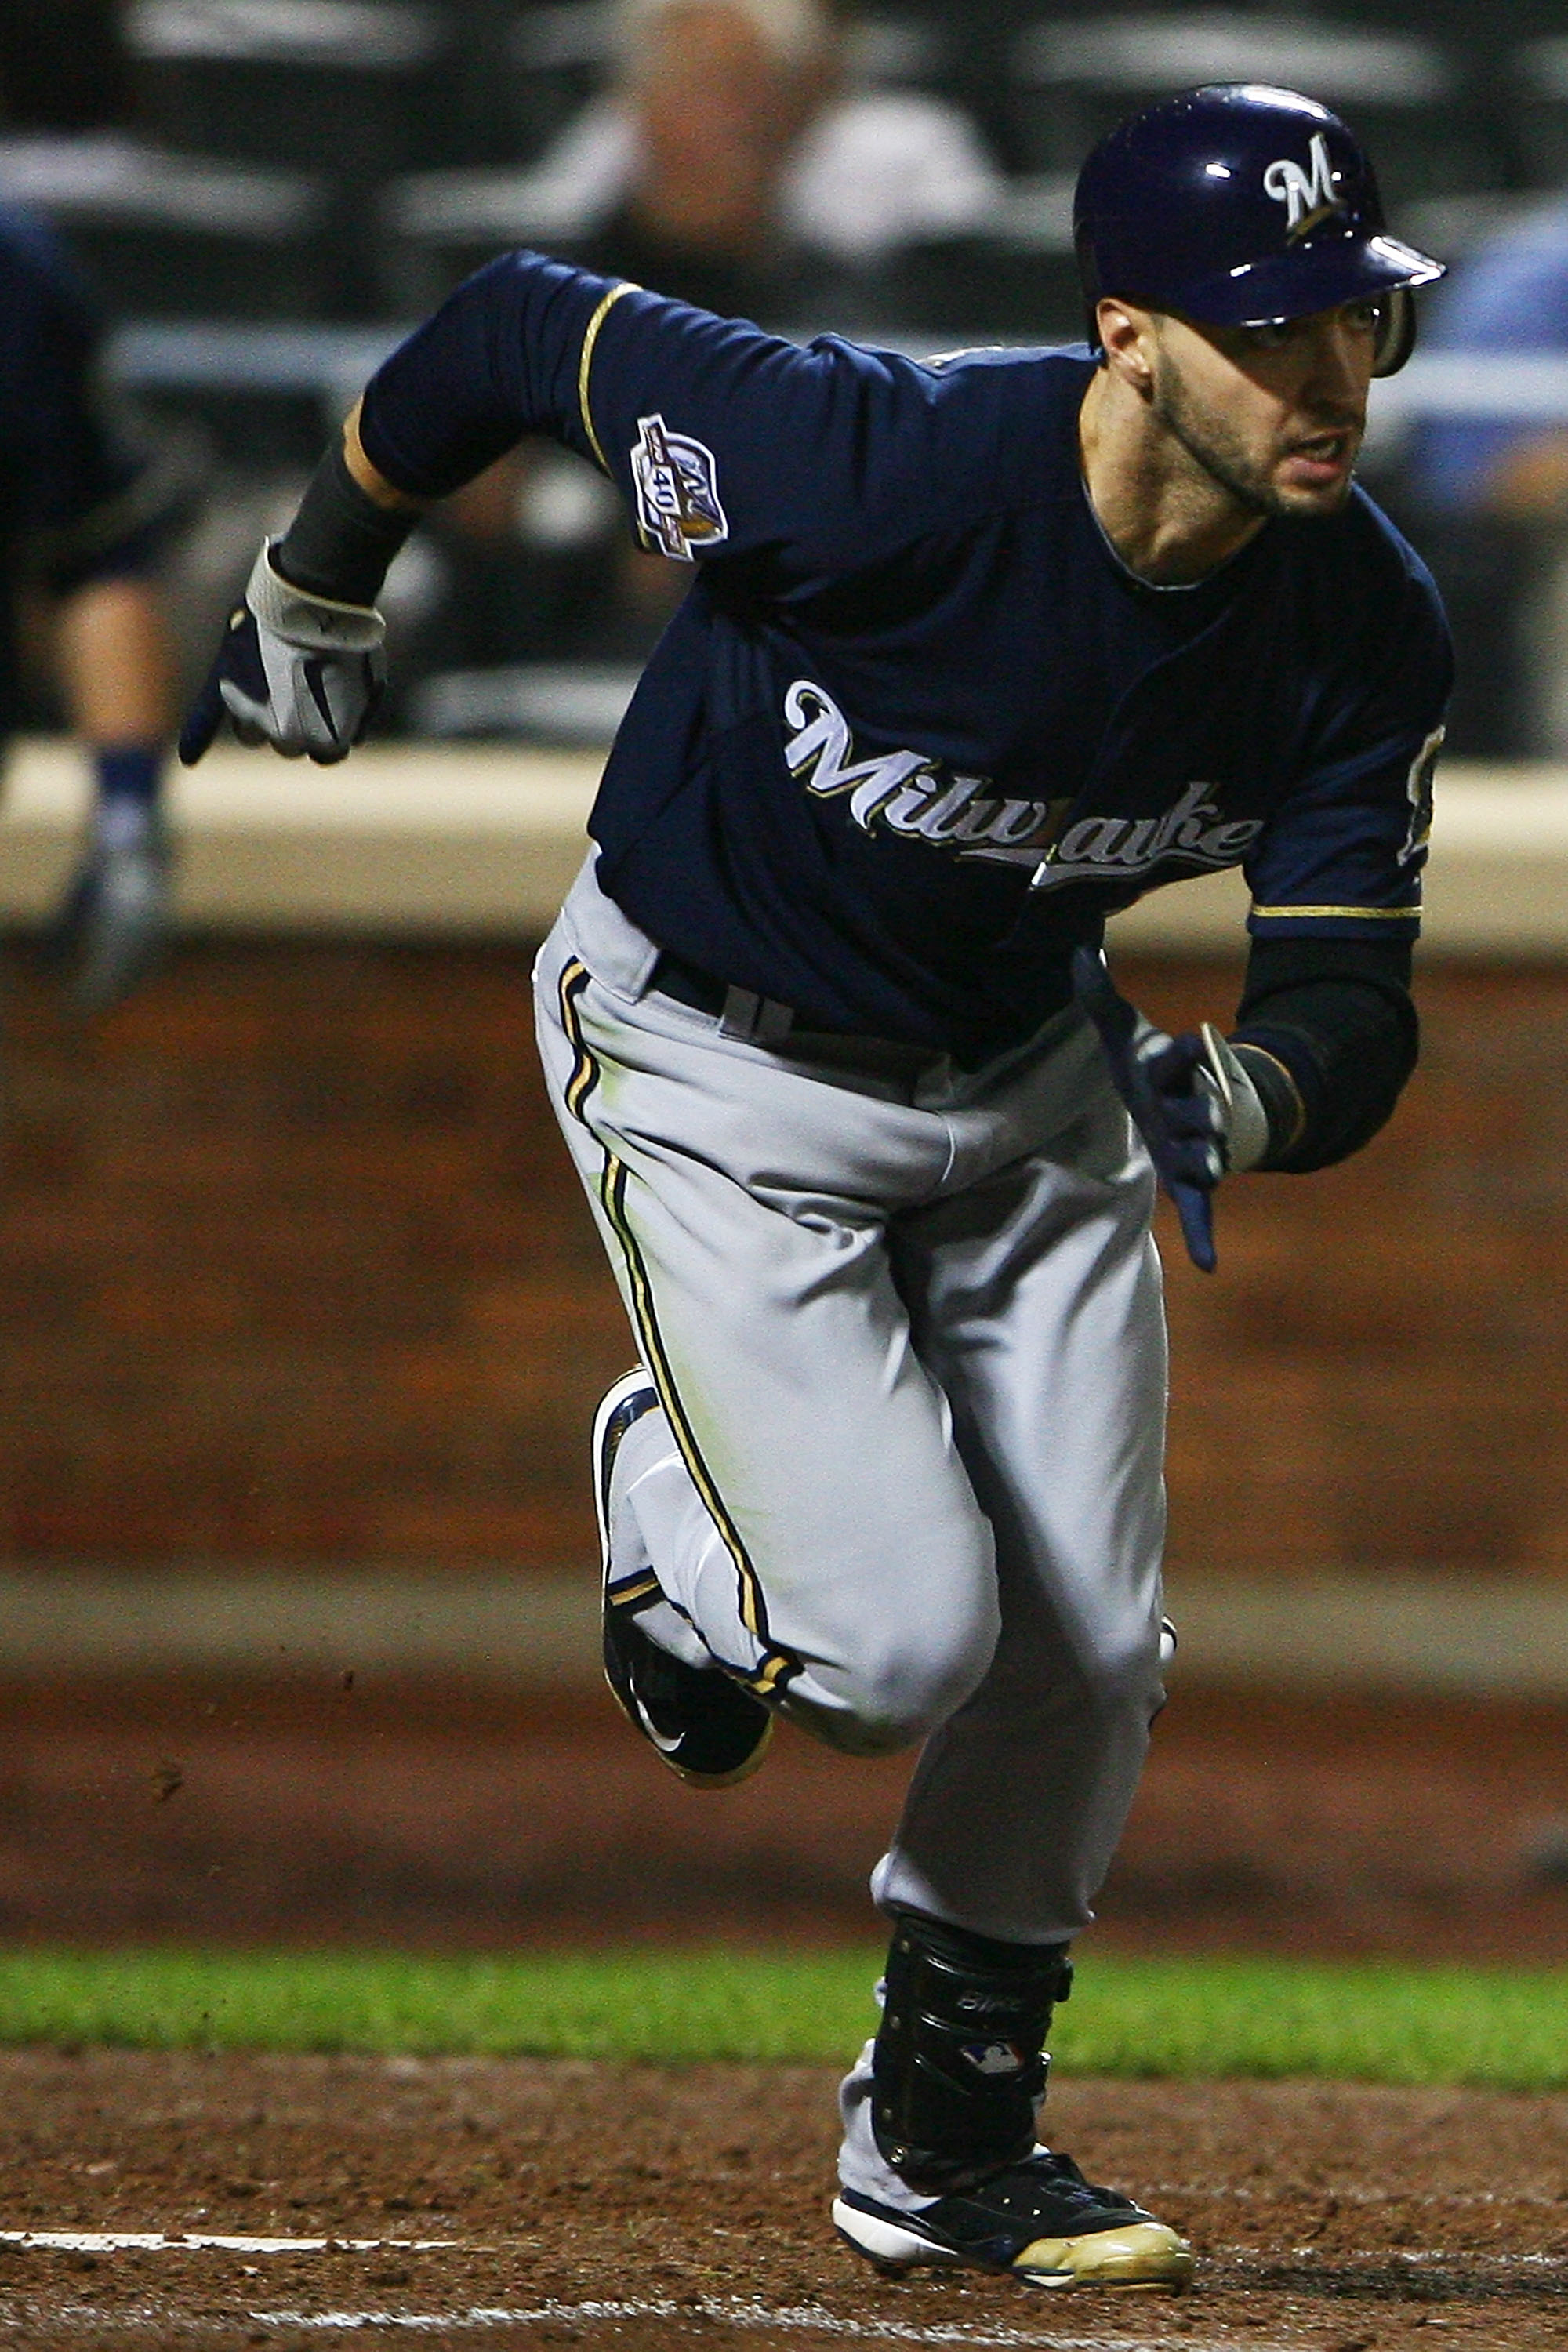 NEW YORK - SEPTEMBER 30: Ryan Braun #8 of the Milwaukee Brewers runs after hitting a one run single in the ninth inning against the New York Mets on September 30, 2010 at Citi Field in the Flushing neighborhood of the Queens borough of New York City. The